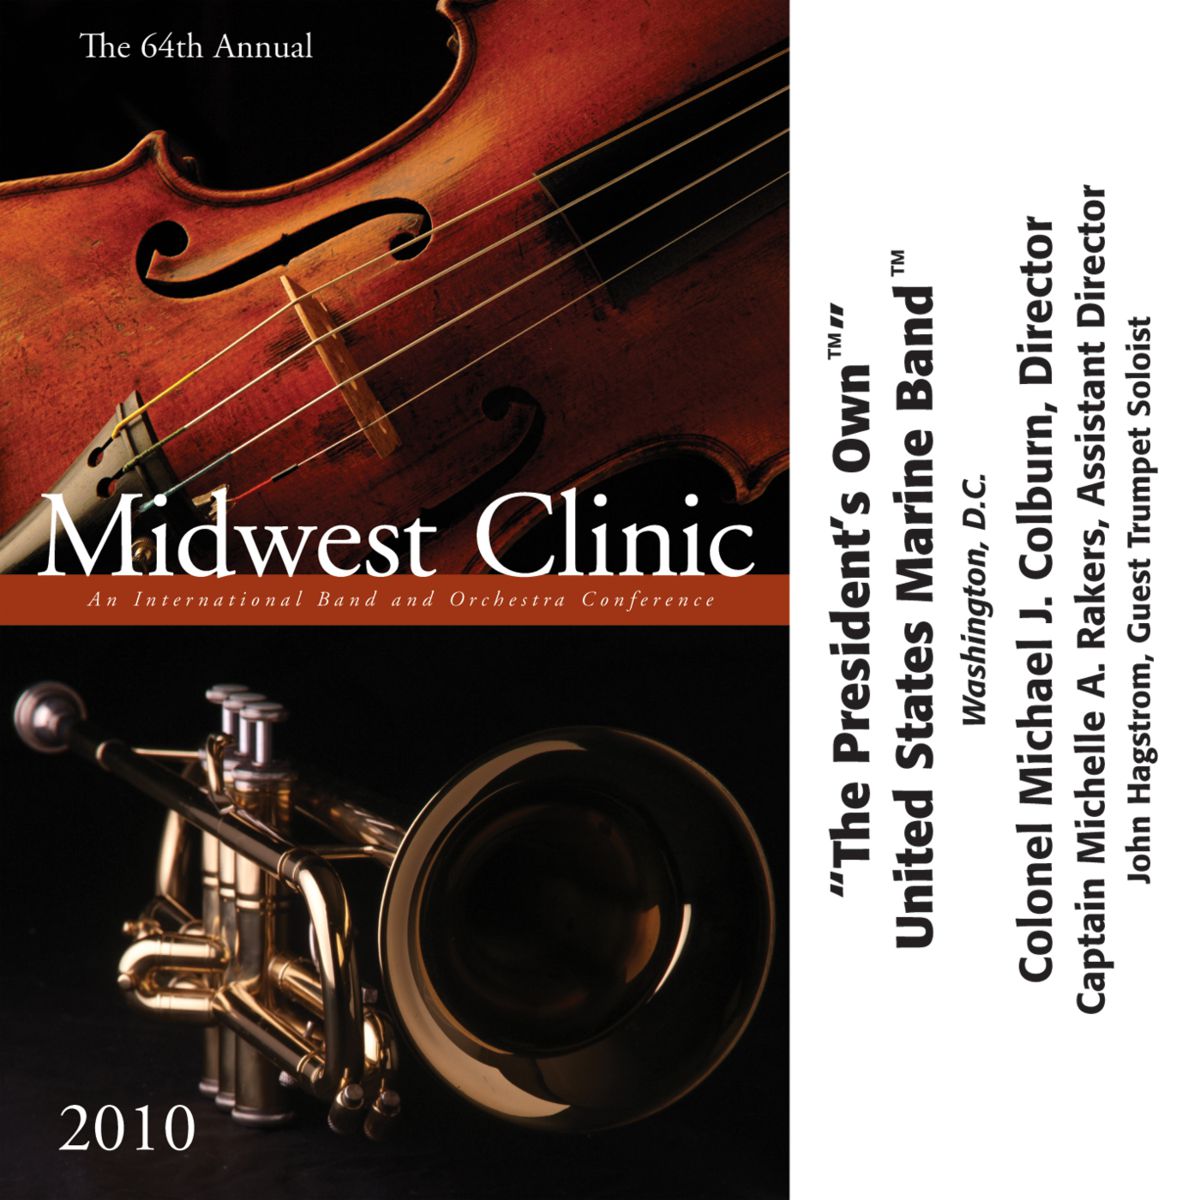 2010 Midwest Clinic: "The President's Own" United States Marine Band - click here